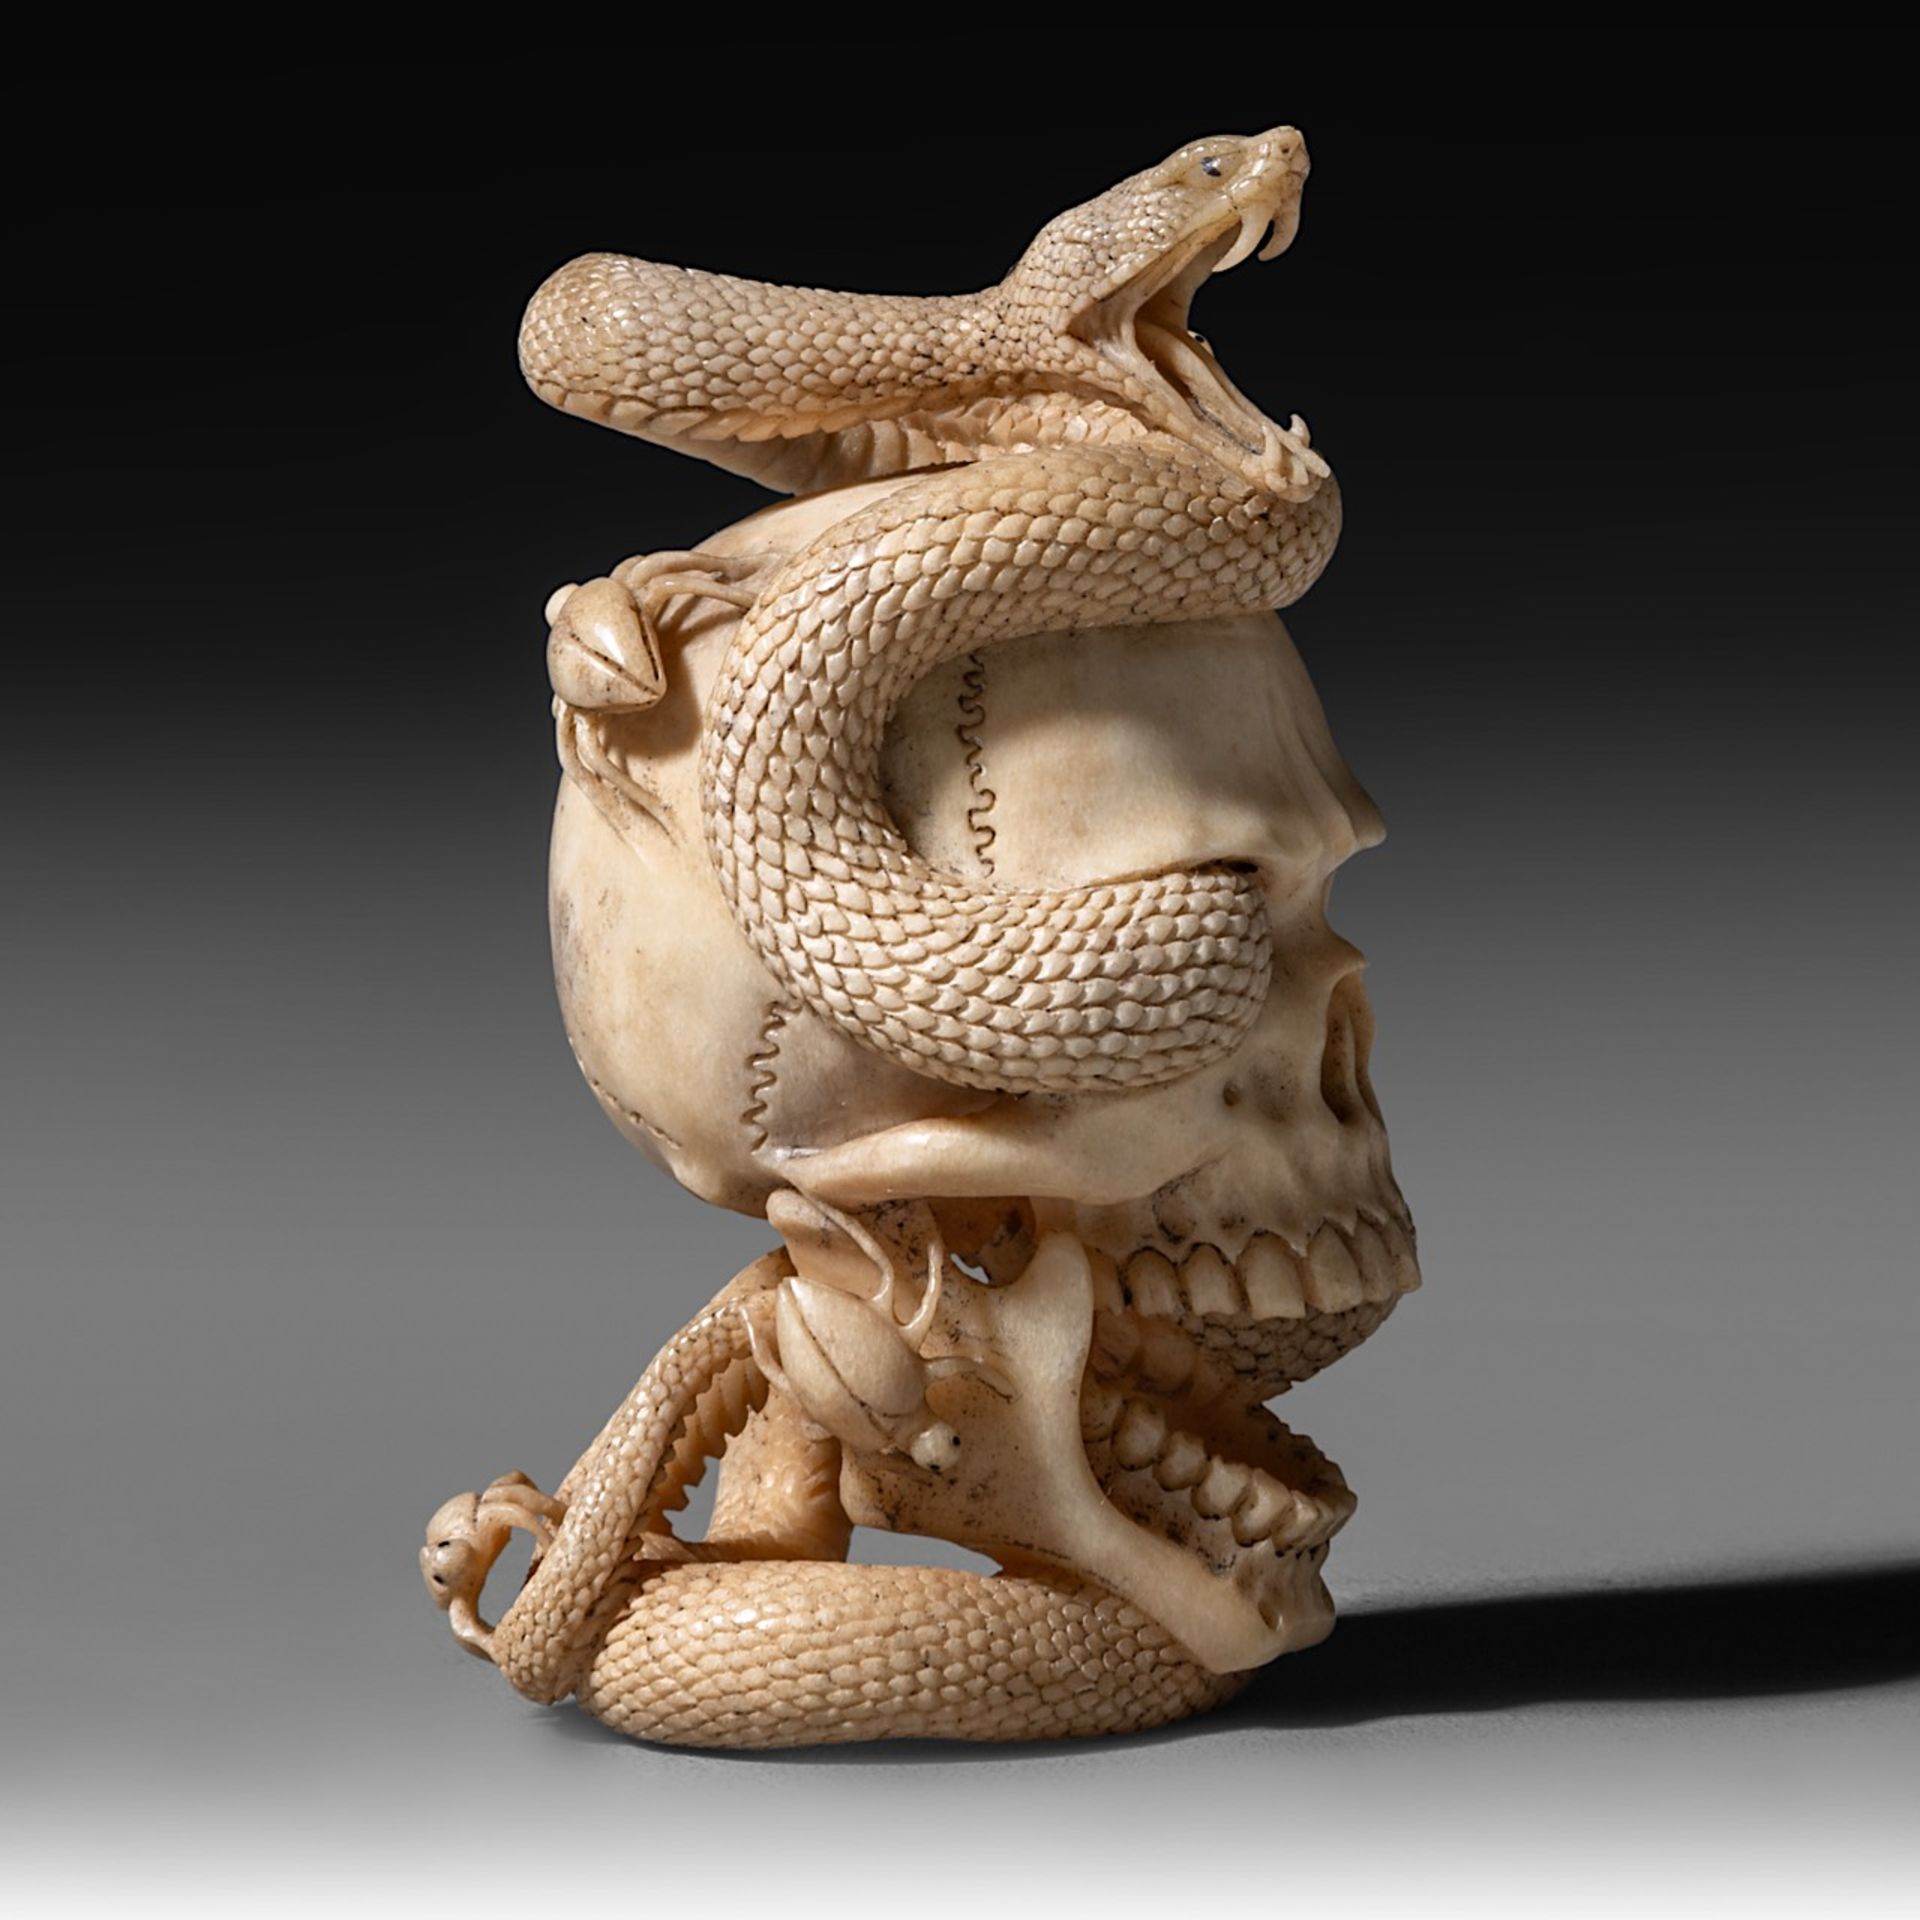 A (German) skull and snake sculpture, bone, 18th - 19th century, H 7,9 cm - weight 79 g - Image 7 of 9